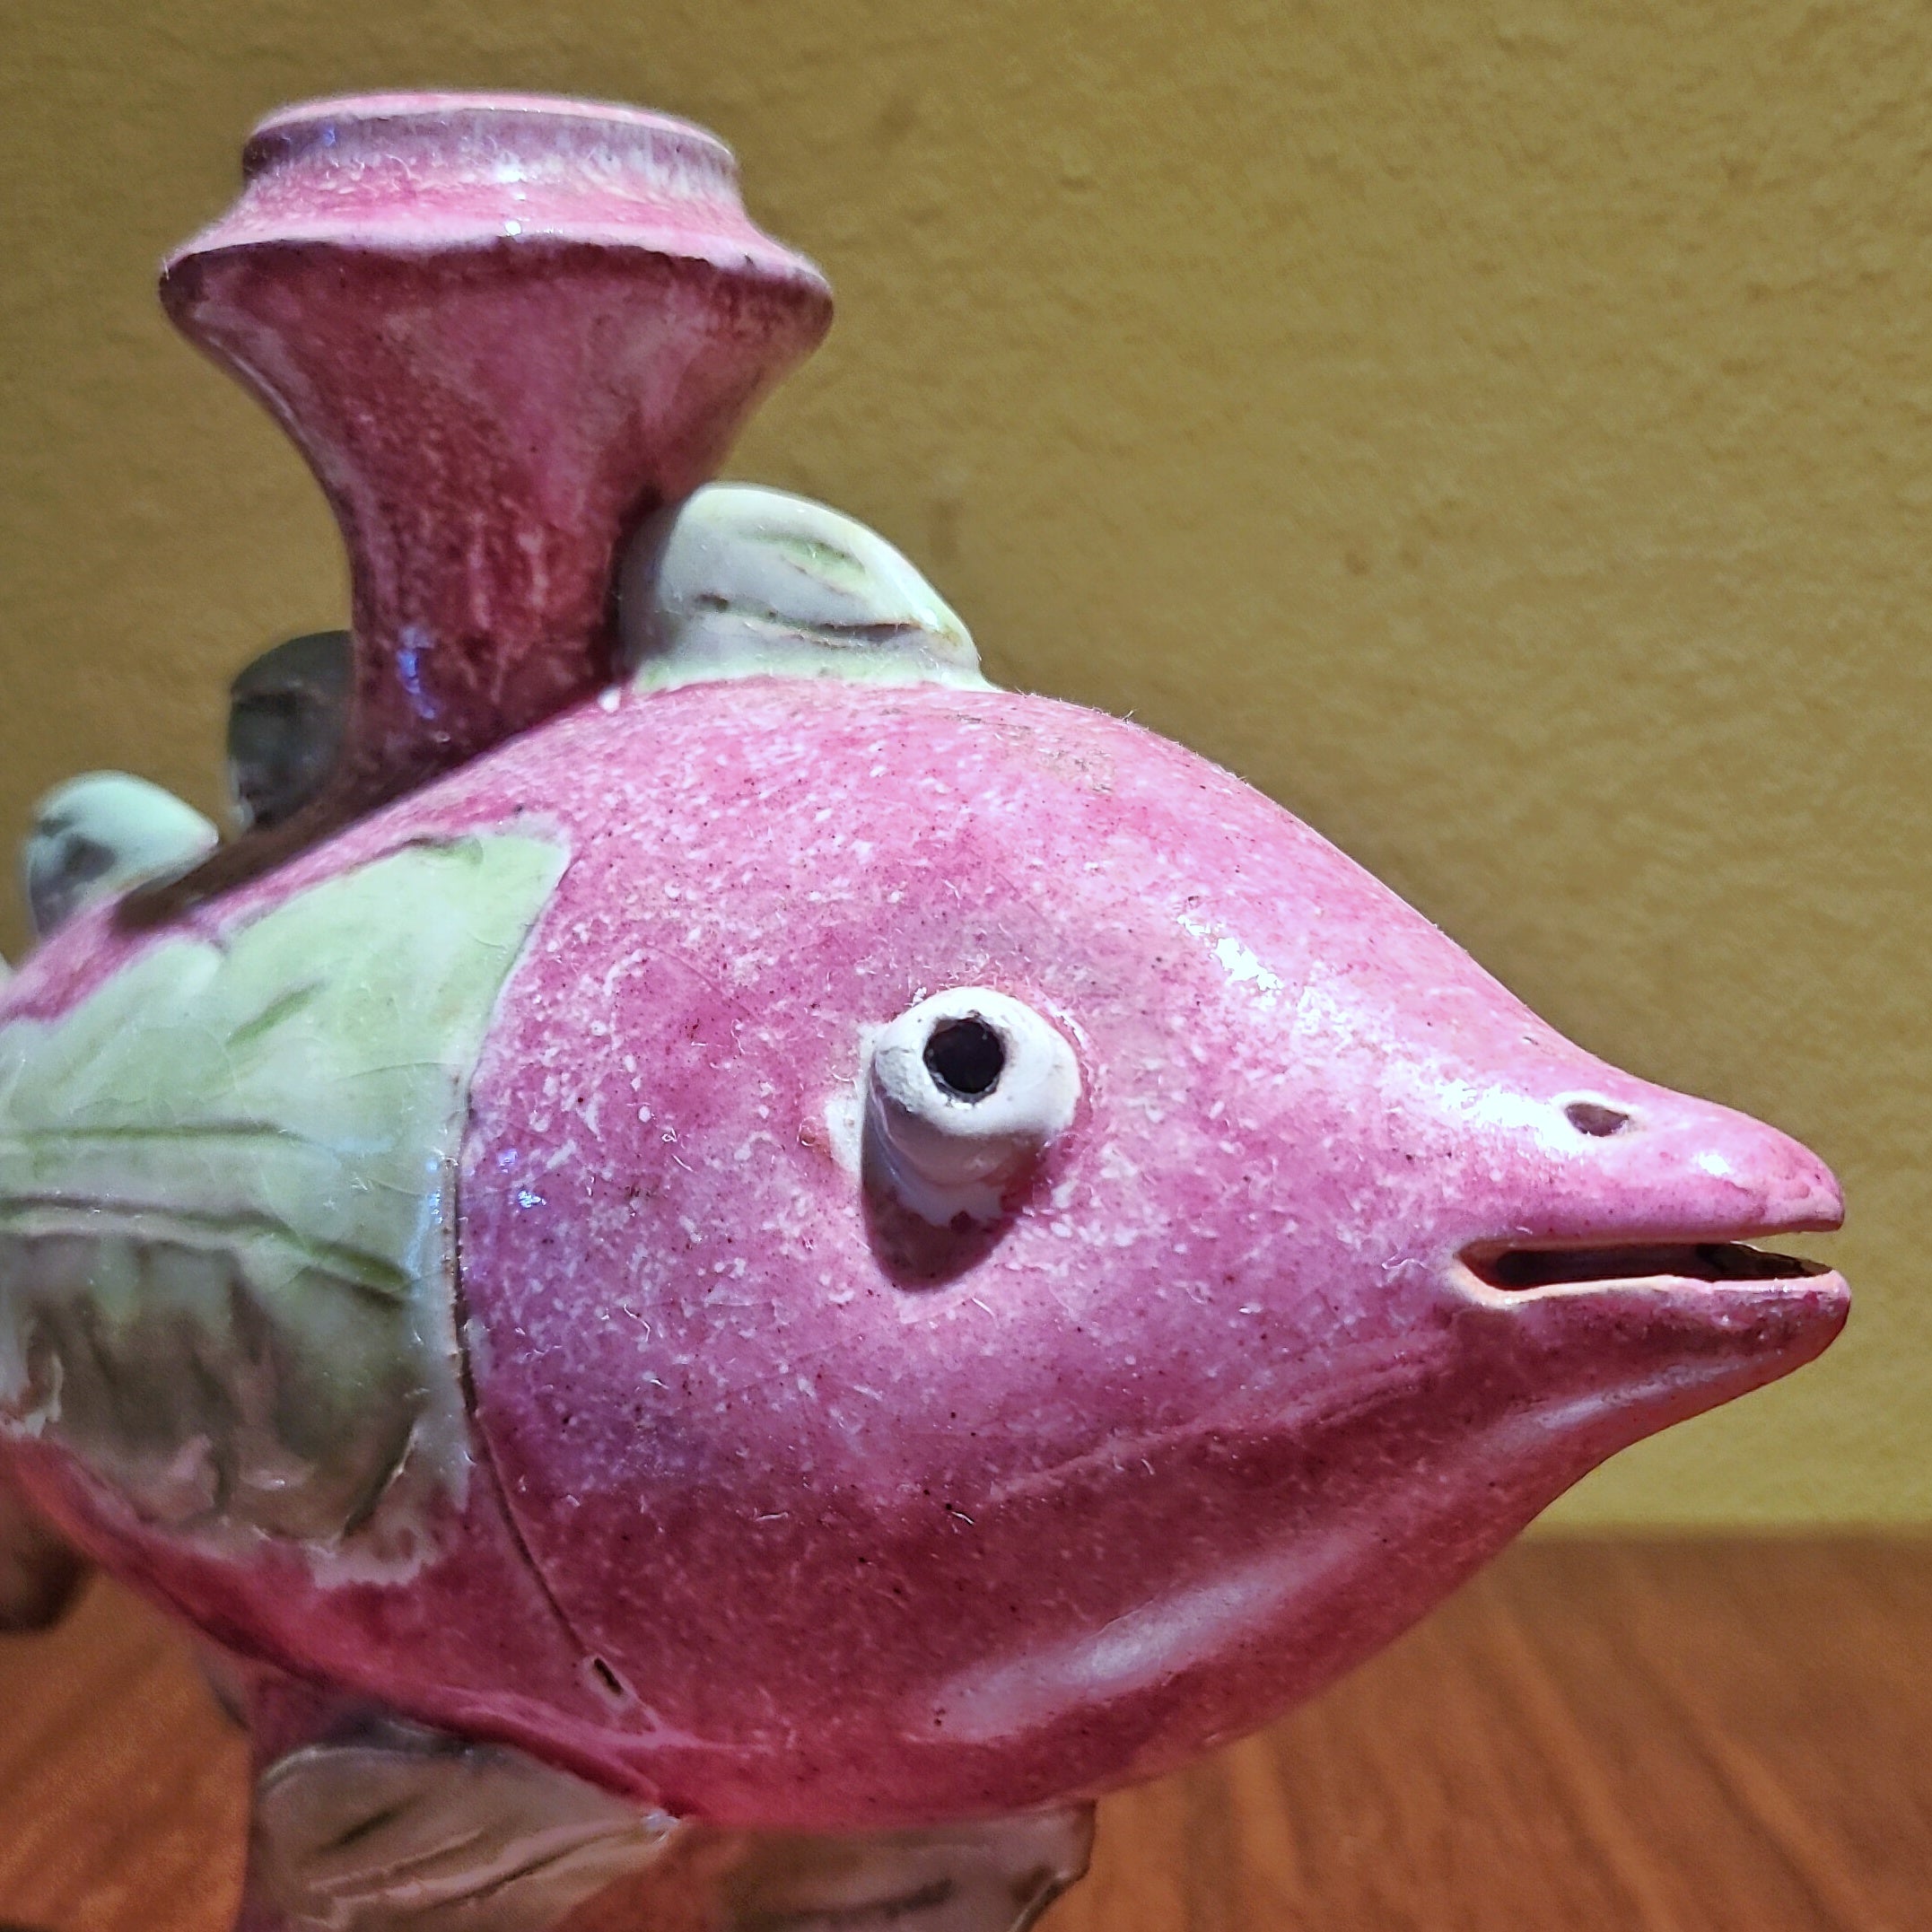 PINK & GREEN MAJOLICA FISH CANDLEHOLDERS BY ND DOLFI FOR NEIMAN MARCUS